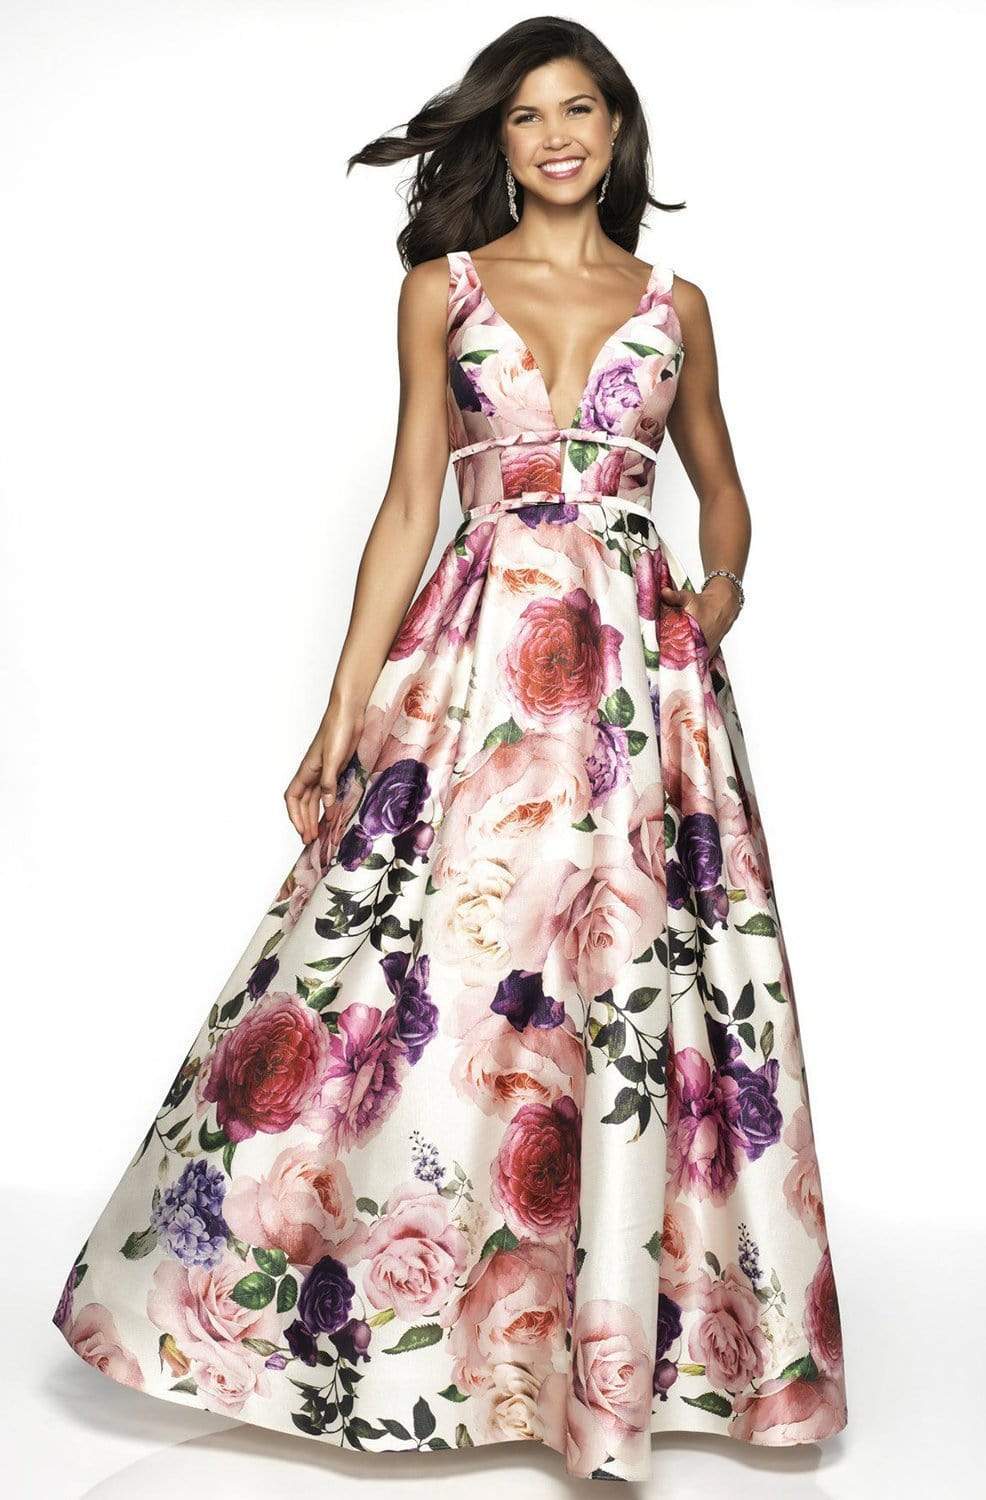 Blush by Alexia Designs - 11735 Plunging Floral Print Ballgown Special Occasion Dress 0 / Off White/Floral Print